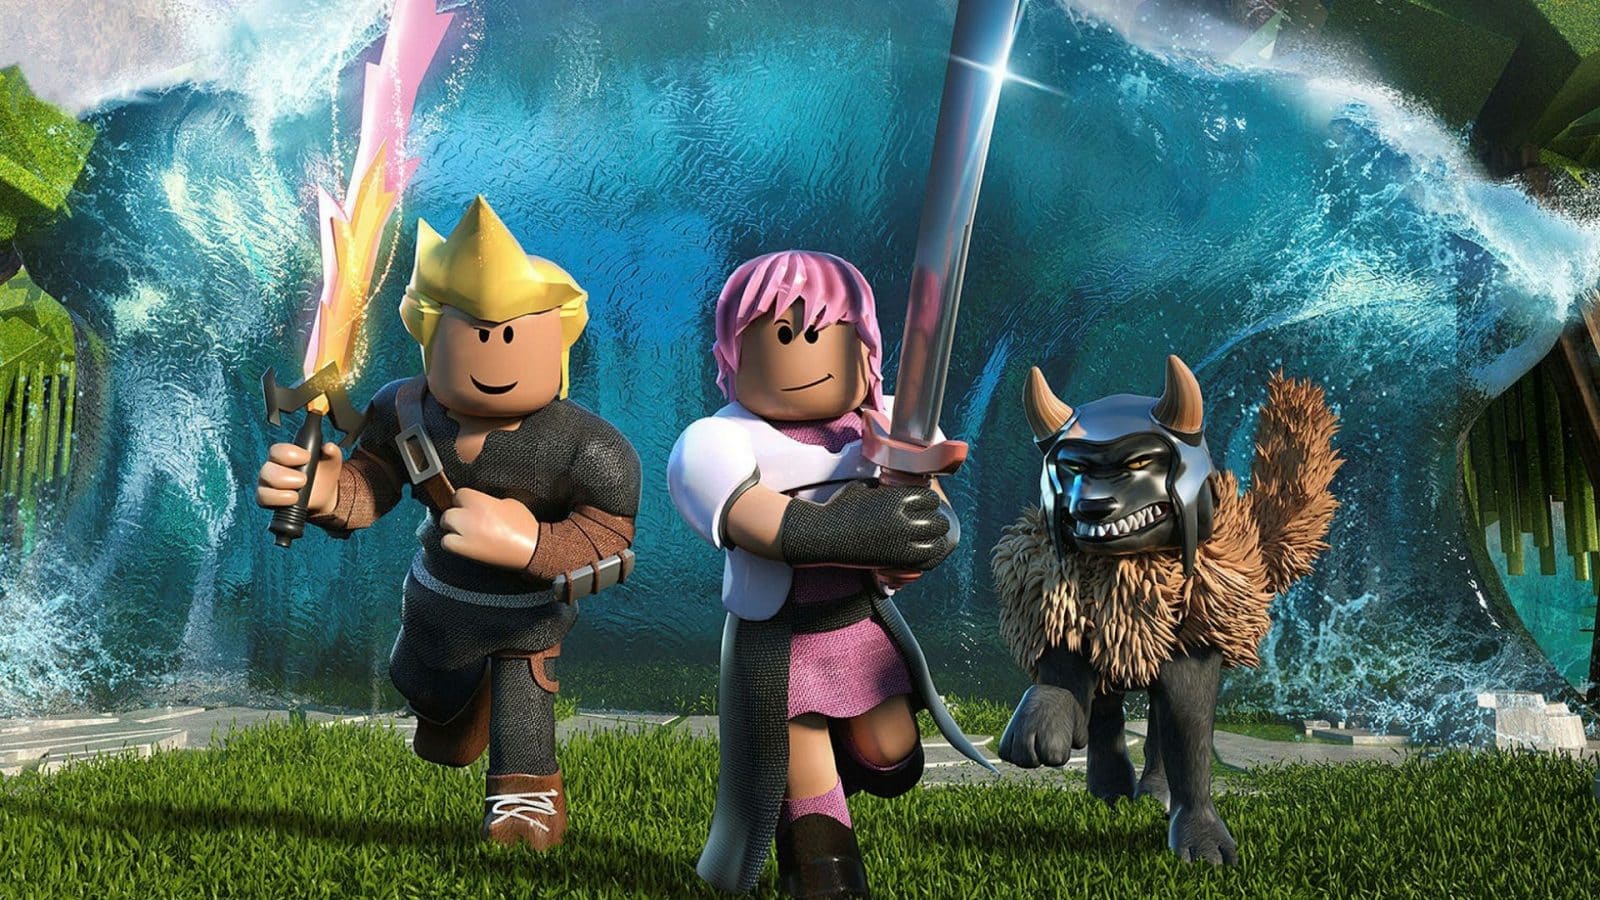 Roblox devs admit they're “burnt out” as hackers run rampant - Dexerto